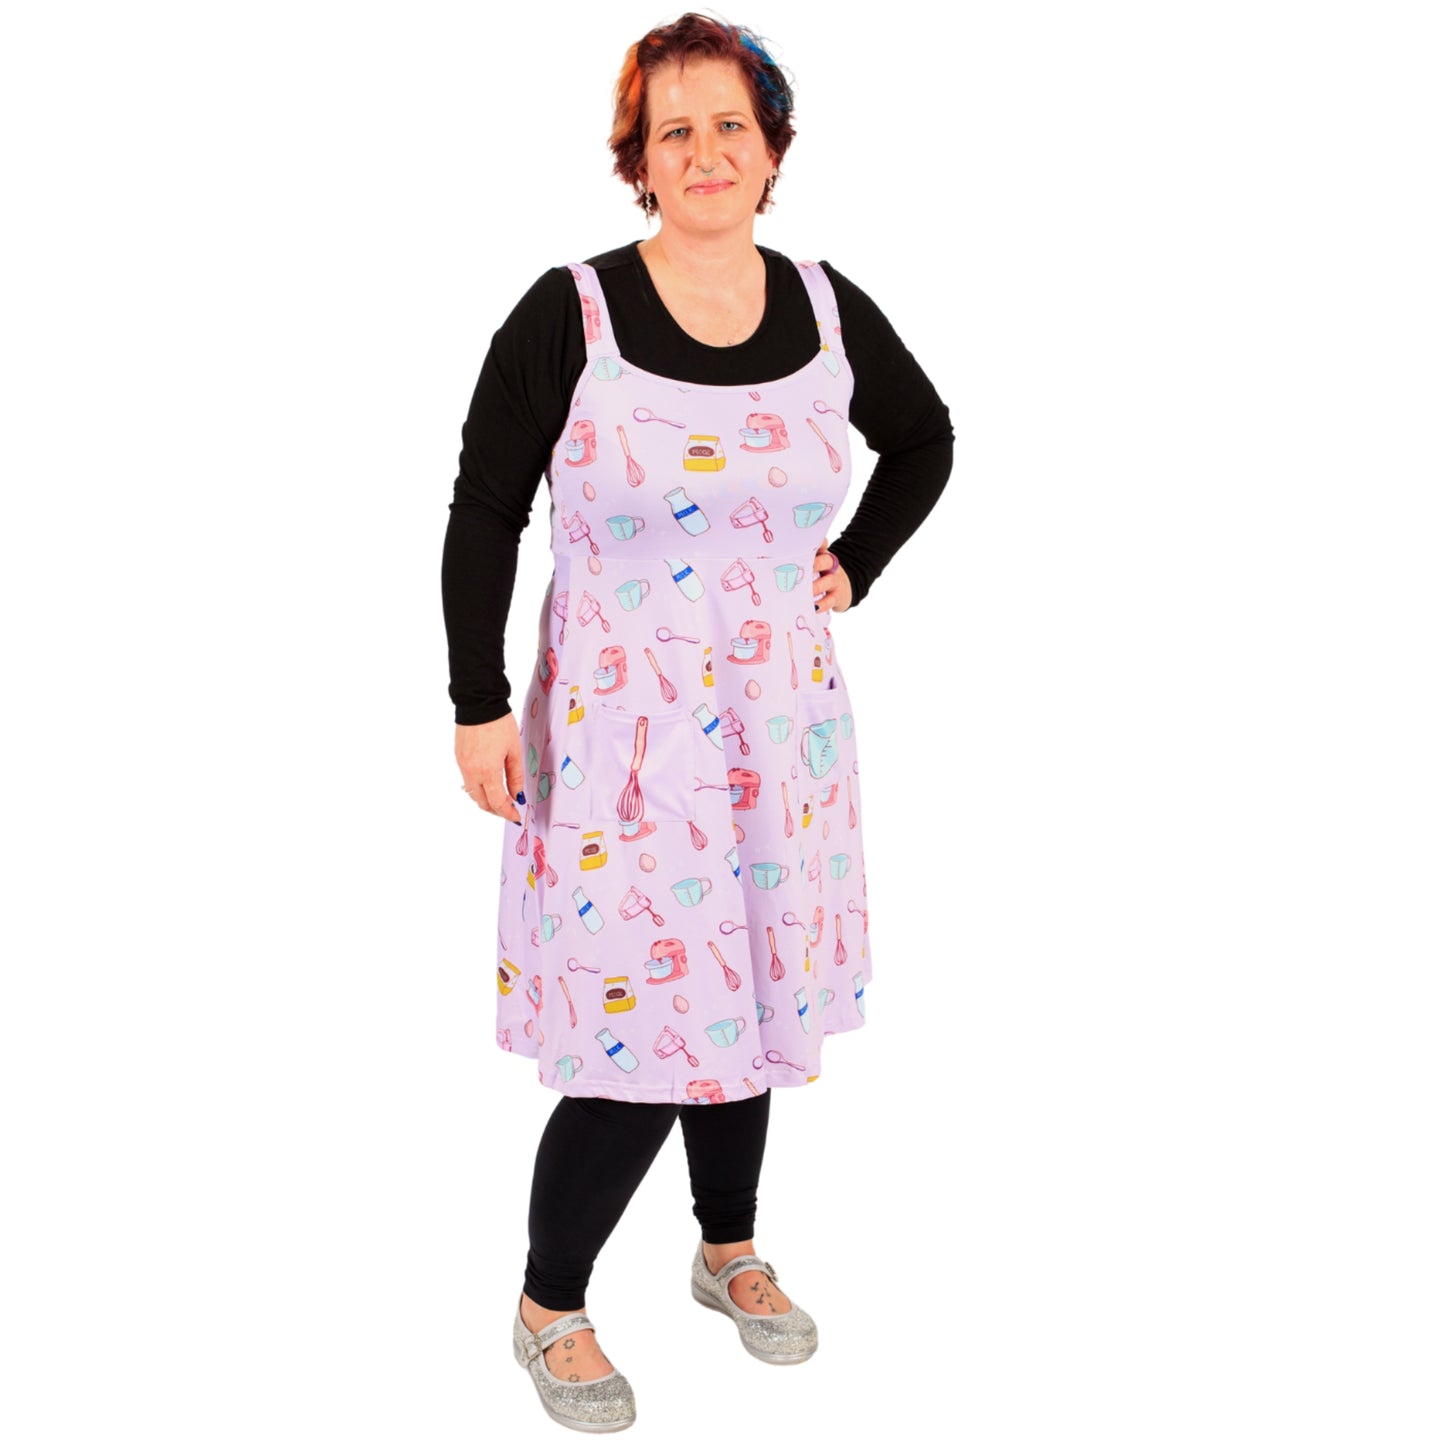 Bakery Pinafore by RainbowsAndFairies.com.au (Cooking - Whisk - Mixer - Dress With Pockets - Pinny - Kitsch - Rockabilly - Vintage Inspired) - SKU: CL_PFORE_BAKER_ORG - Pic-03